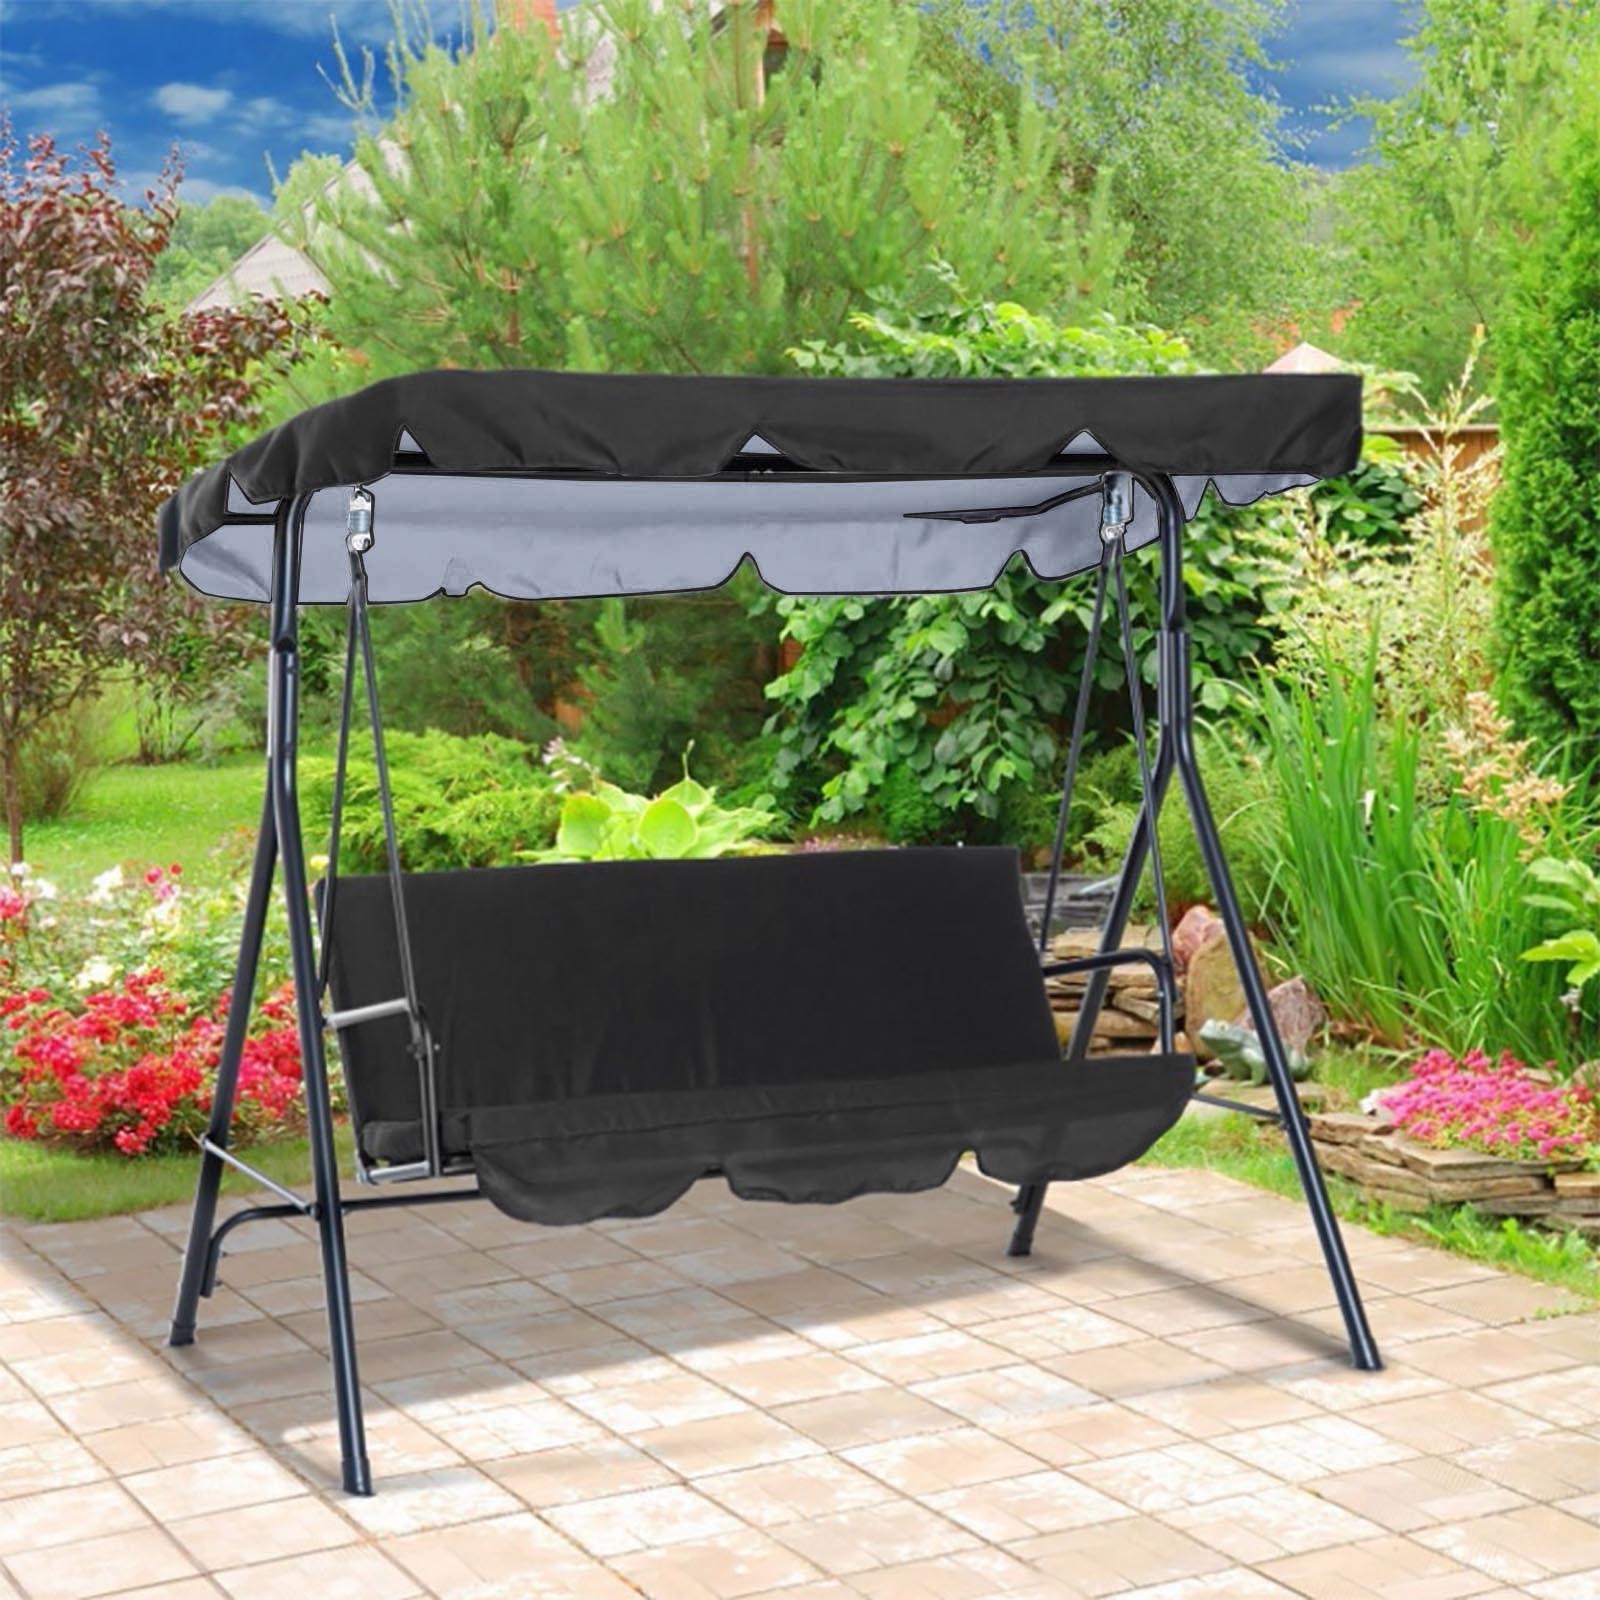 Wovilon Replacement Canopy, Swing Chair Canopy Replacement Swing Canopy Cover Waterproof Garden Swing Chair Canopy Cover for Outdoor Patio Garden Poolside Balcony - image 3 of 5